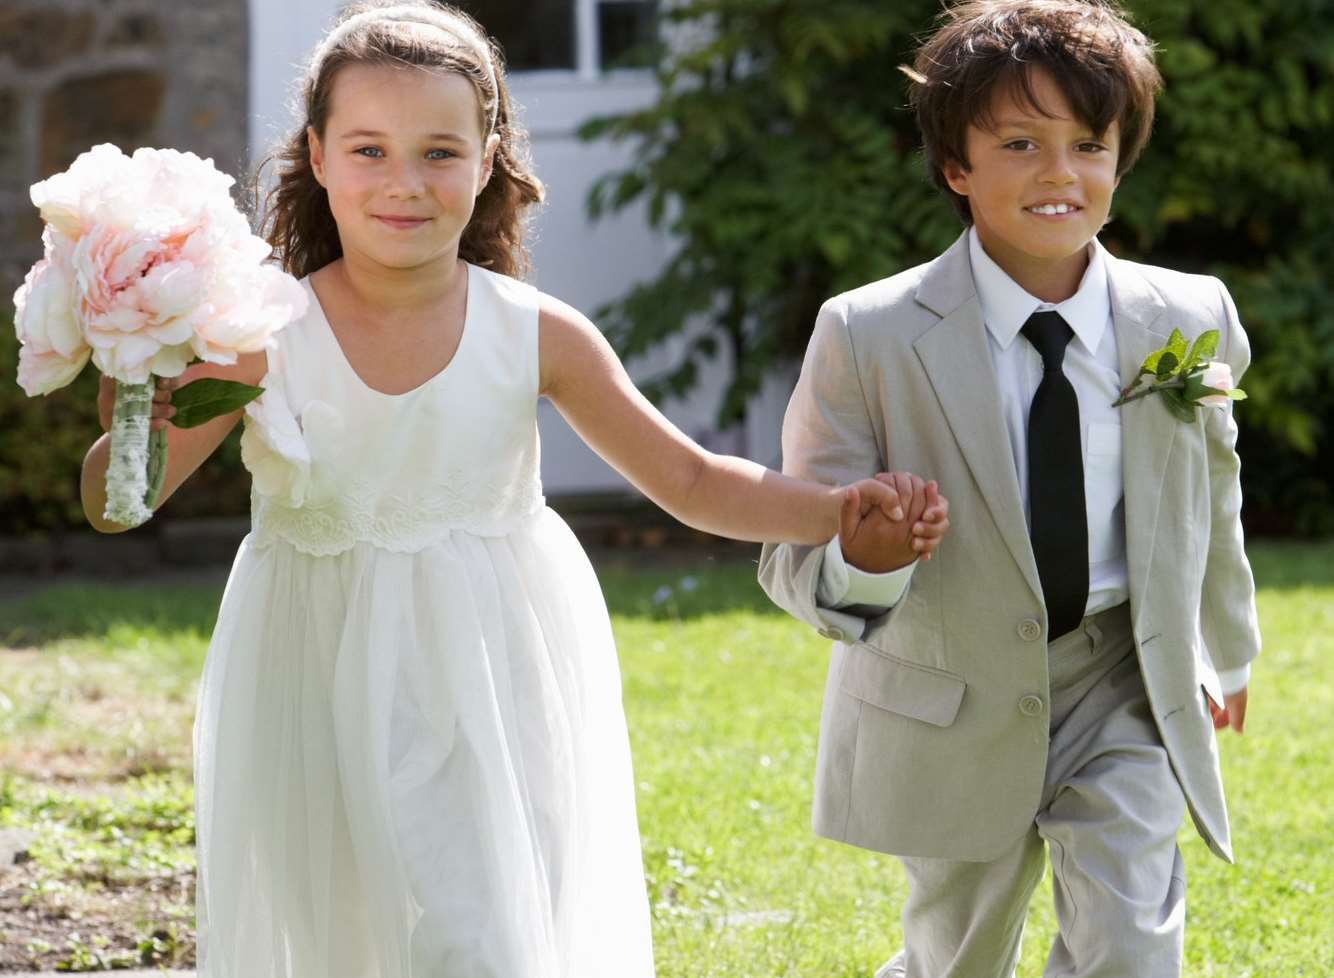 Young children have been ‘getting married’ at St Mary's